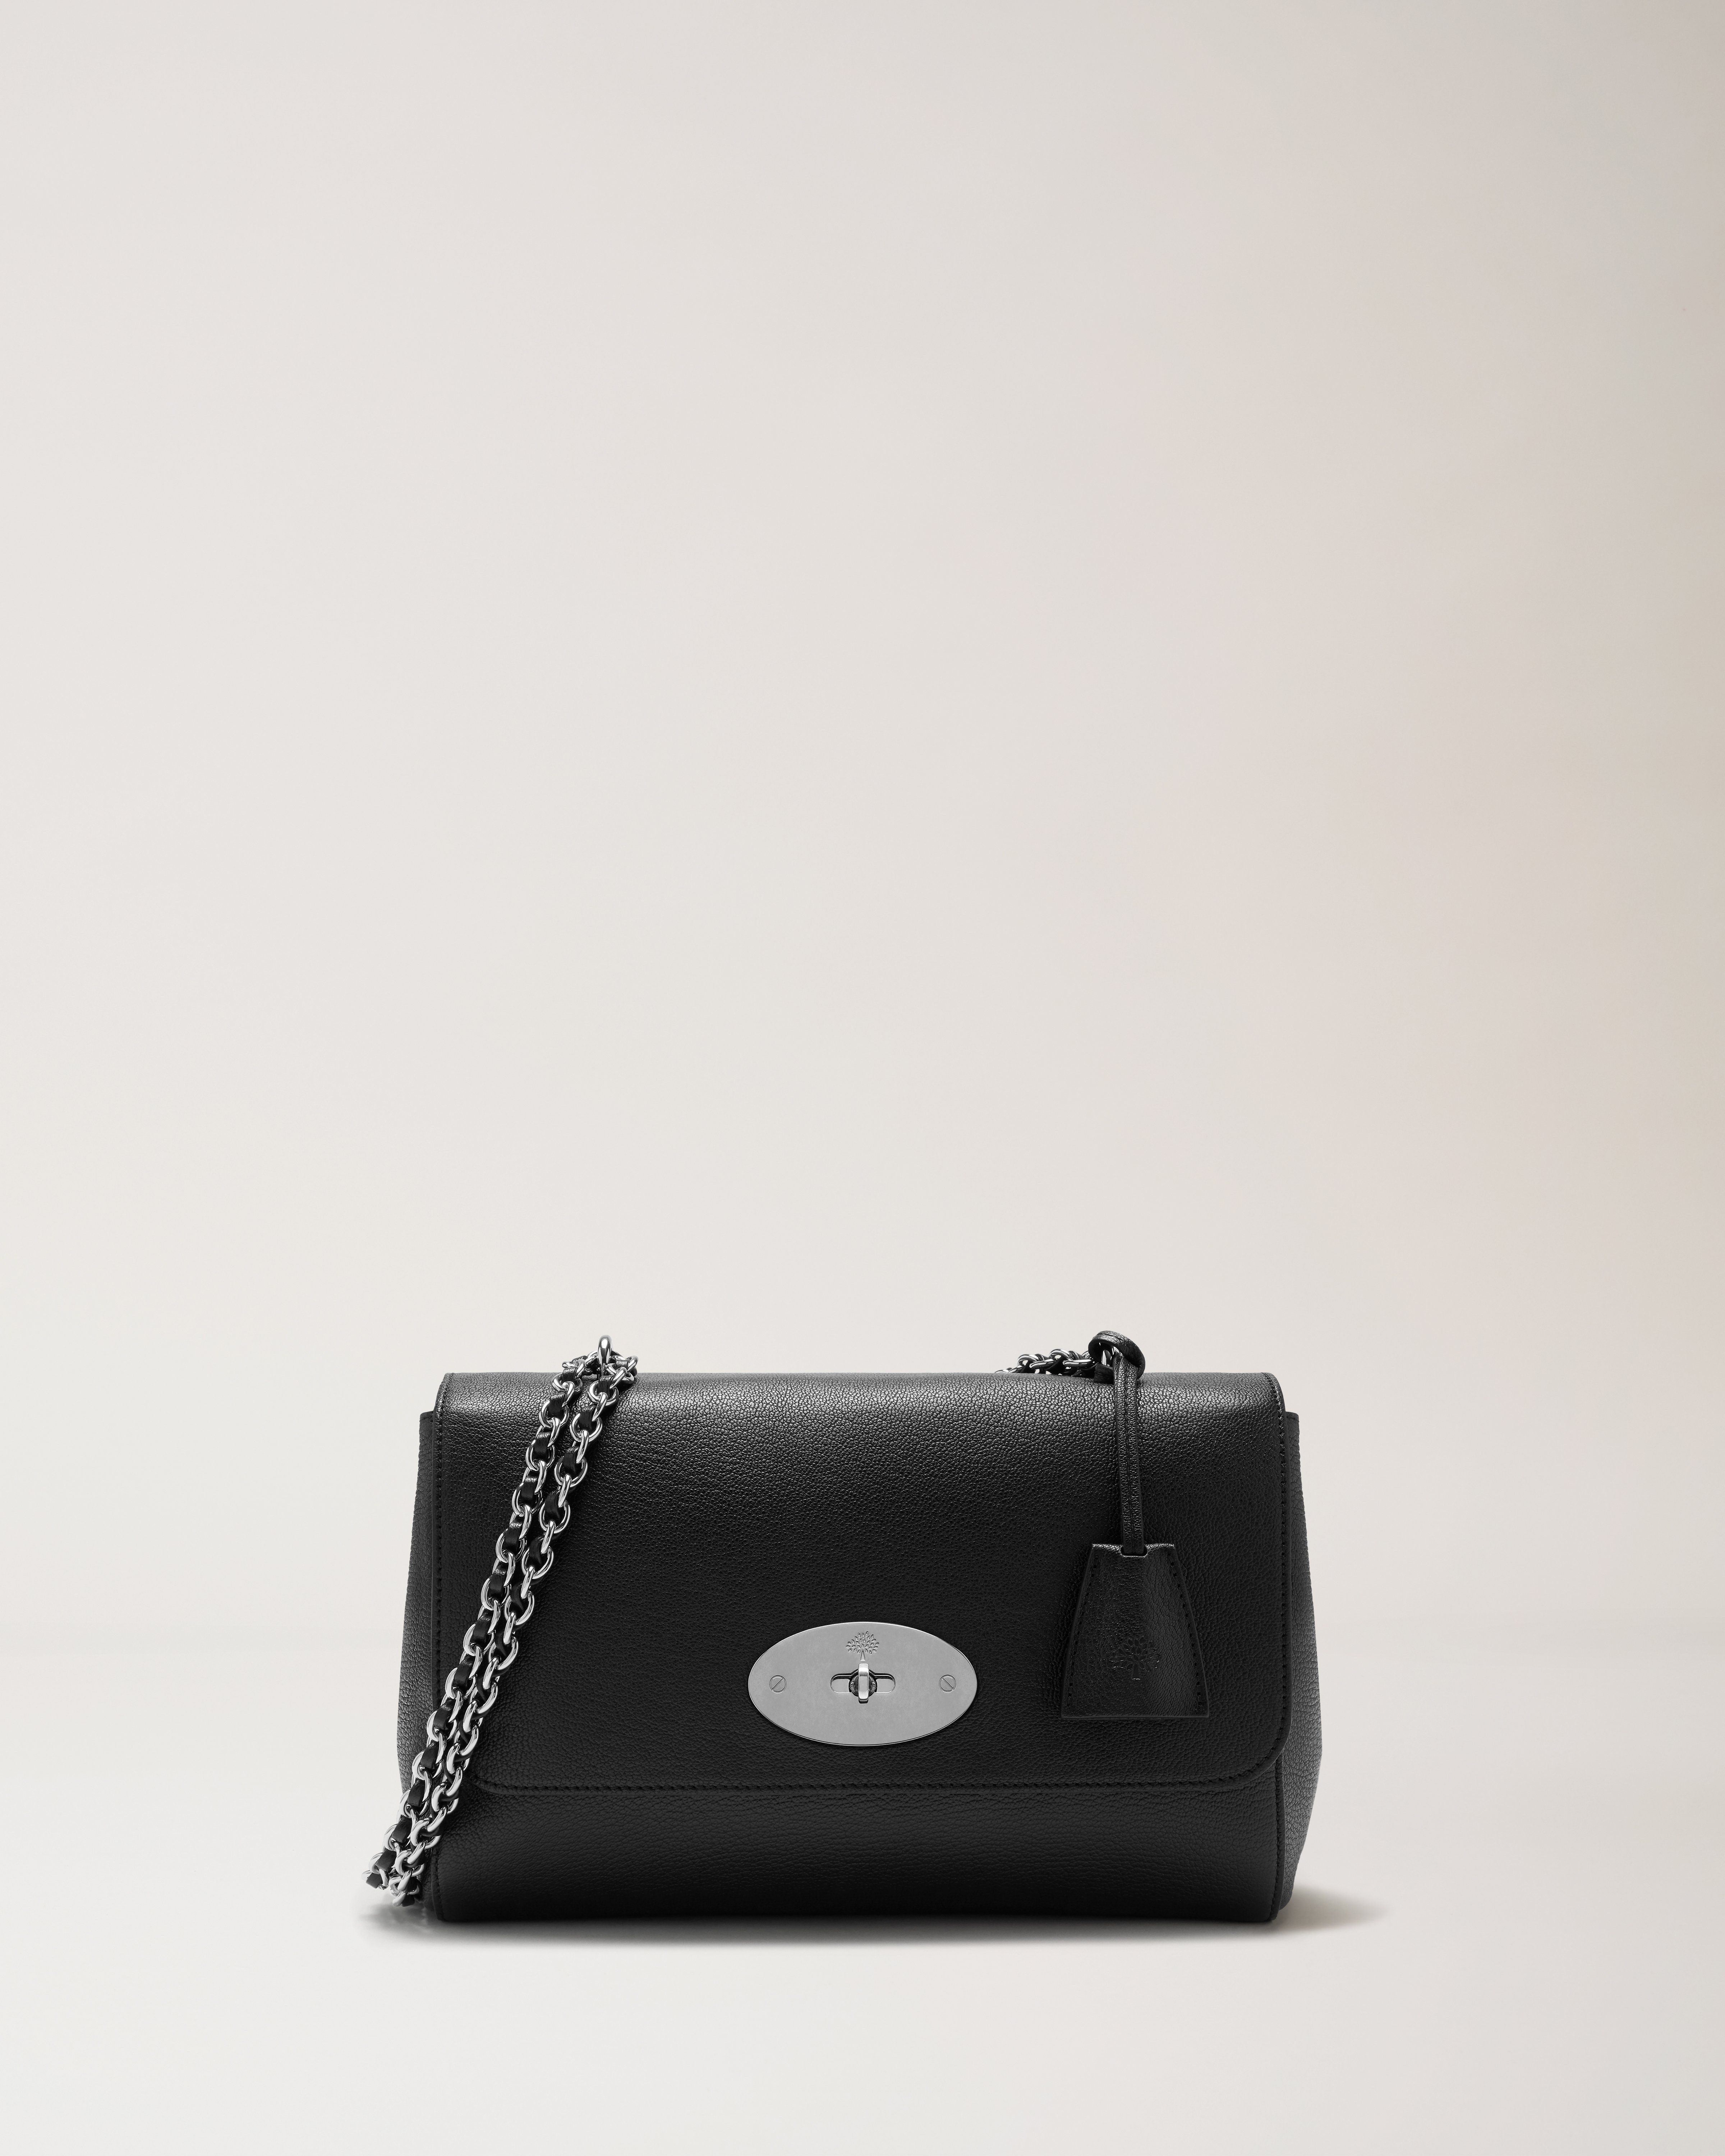 Mulberry Medium Lily bag in Black Silver